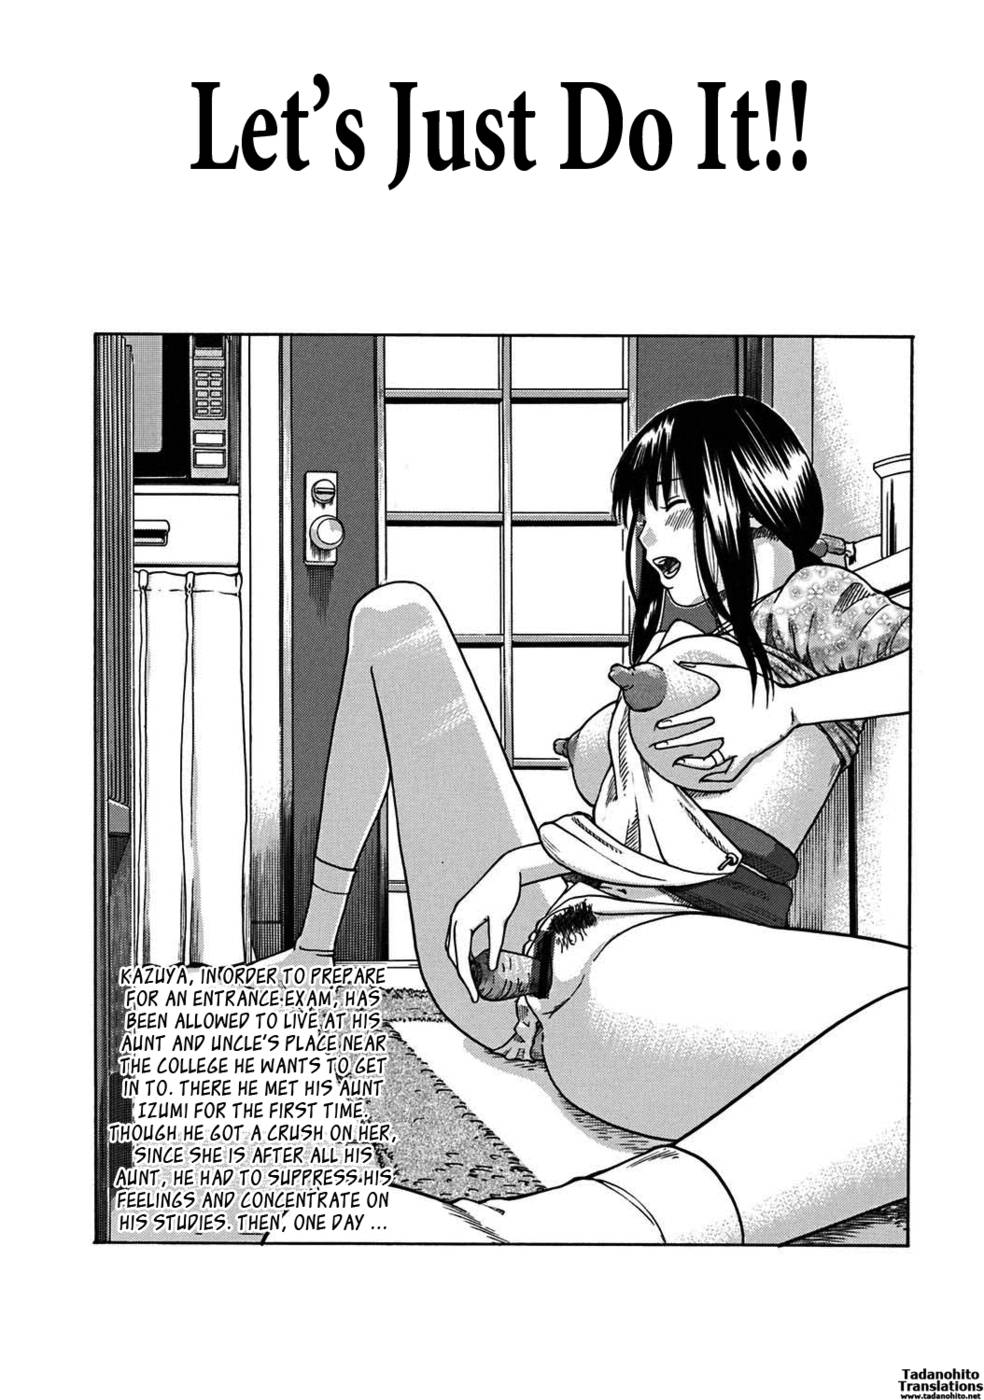 Hentai Manga Comic-33 Year Old Unsatisfied Wife-Chapter 10-Let's Just Do It-1